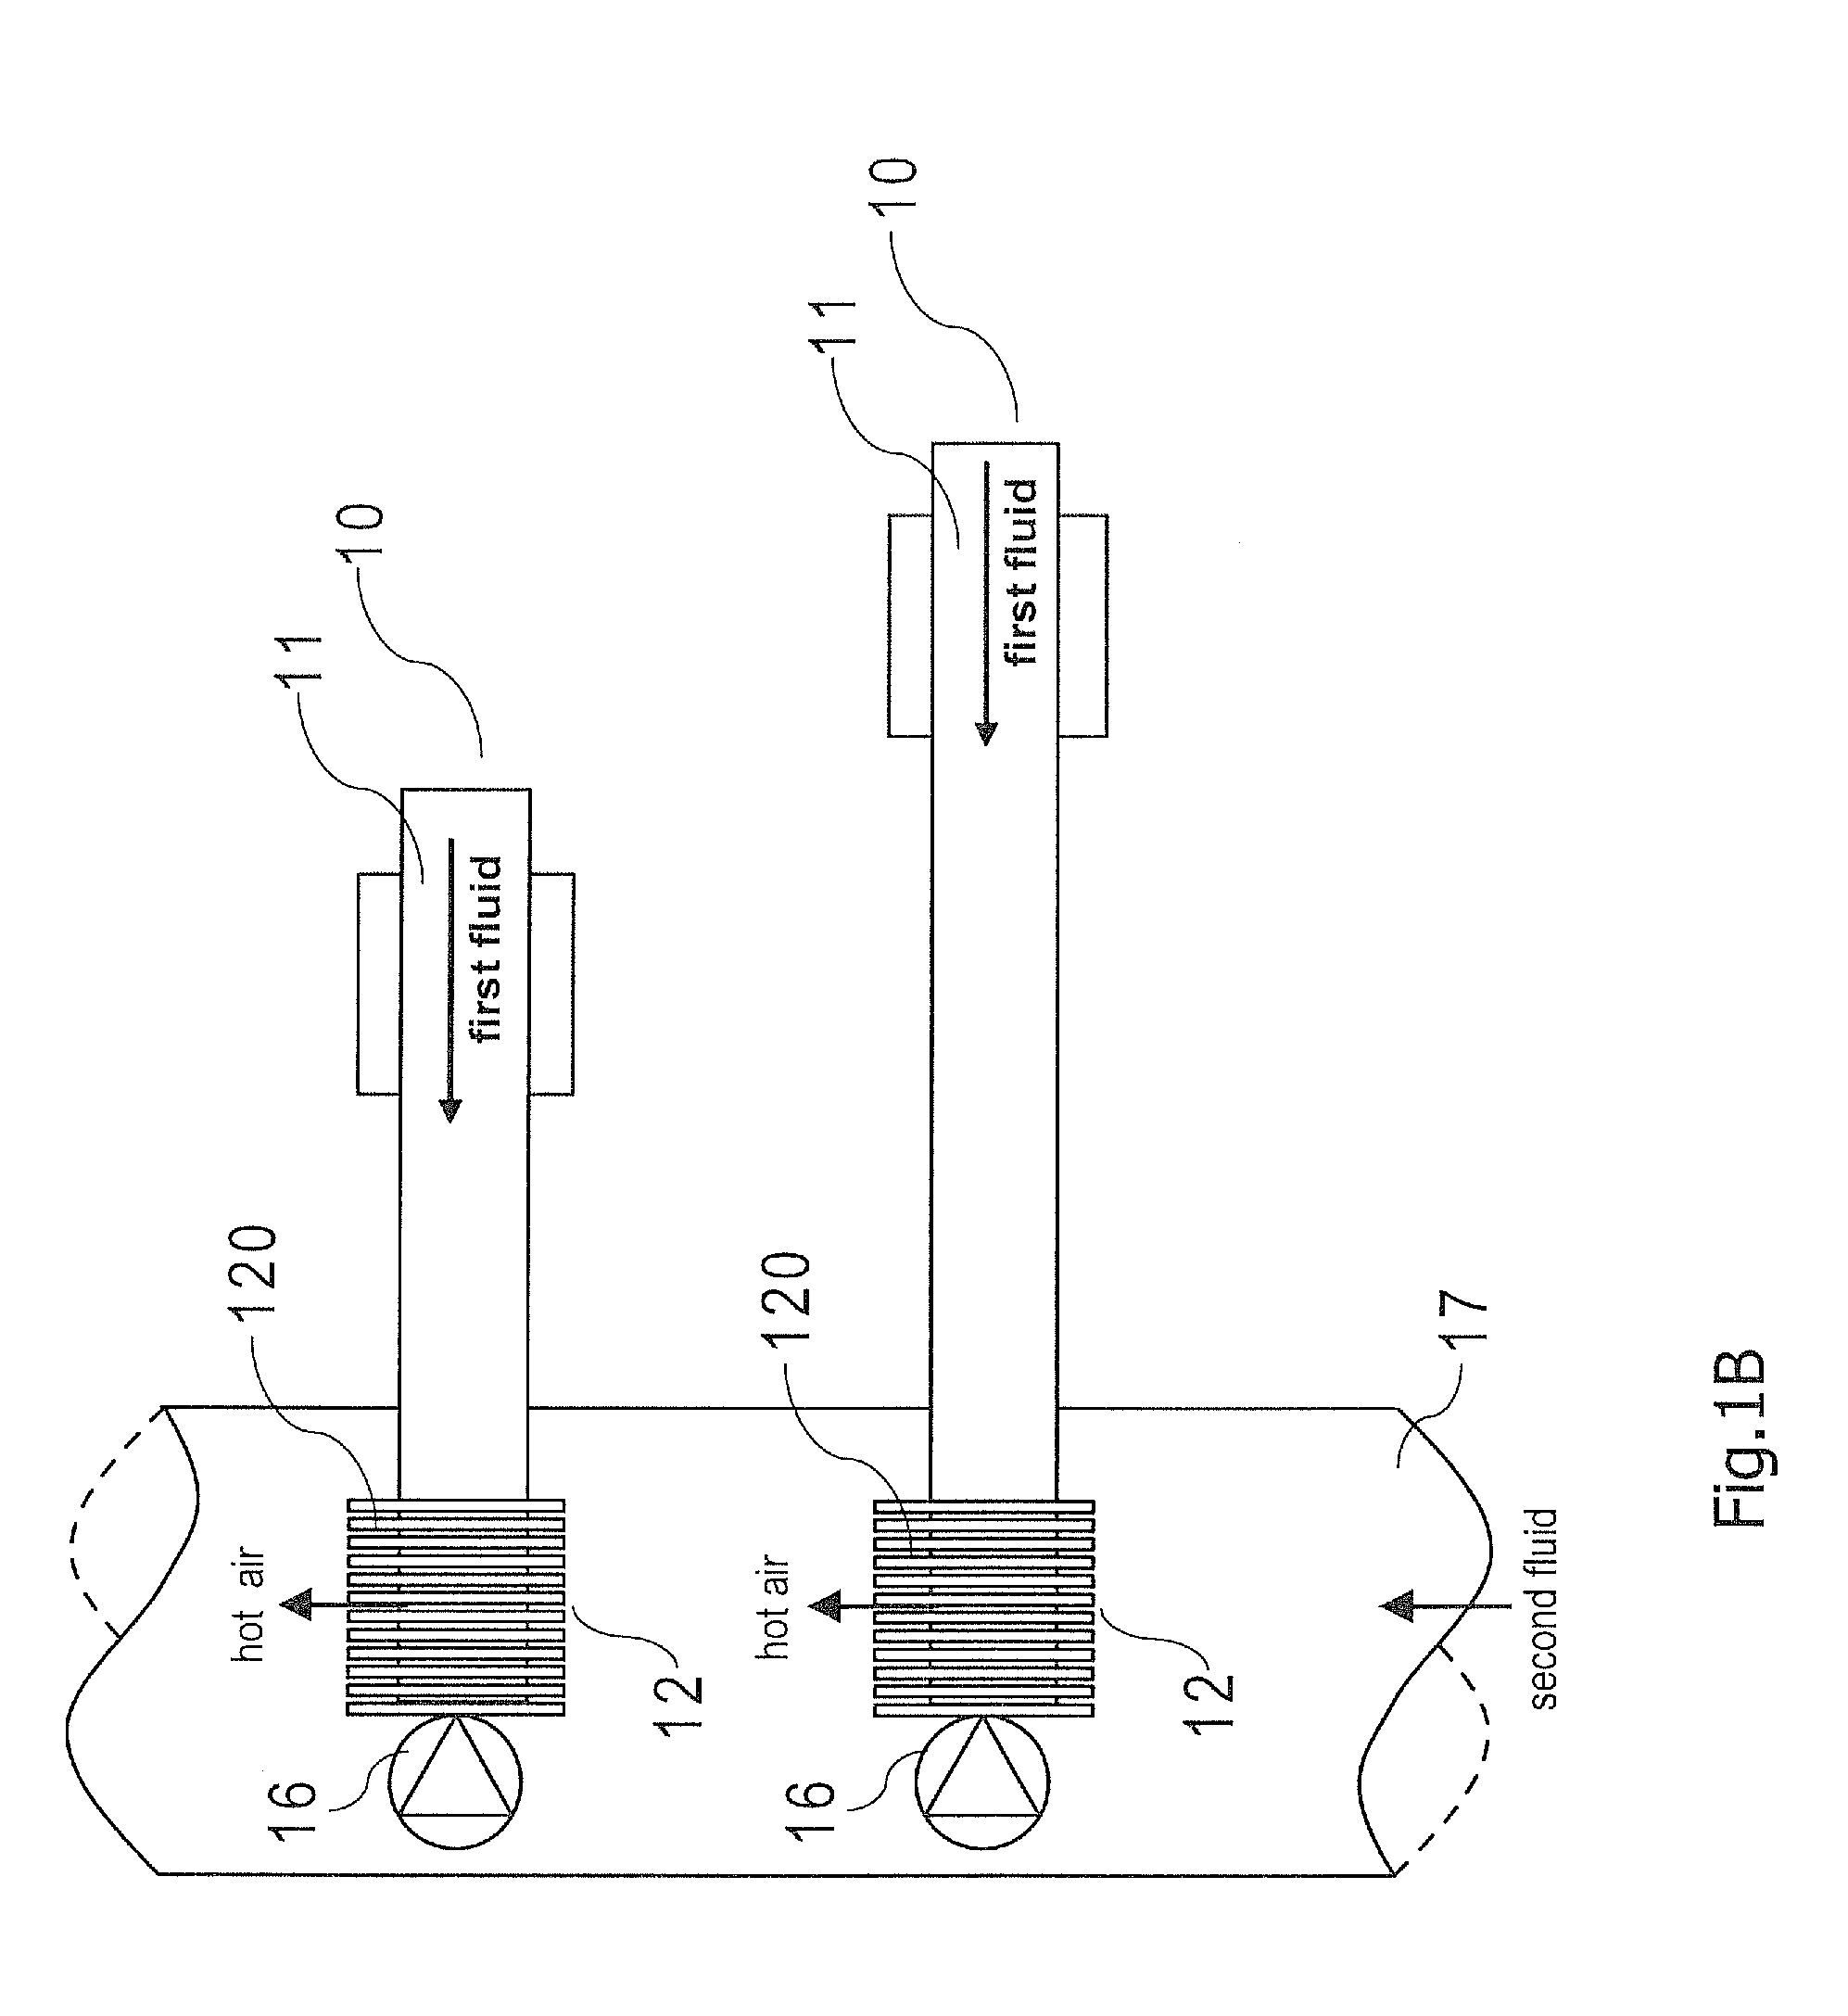 Heat dissipation apparatus for data center